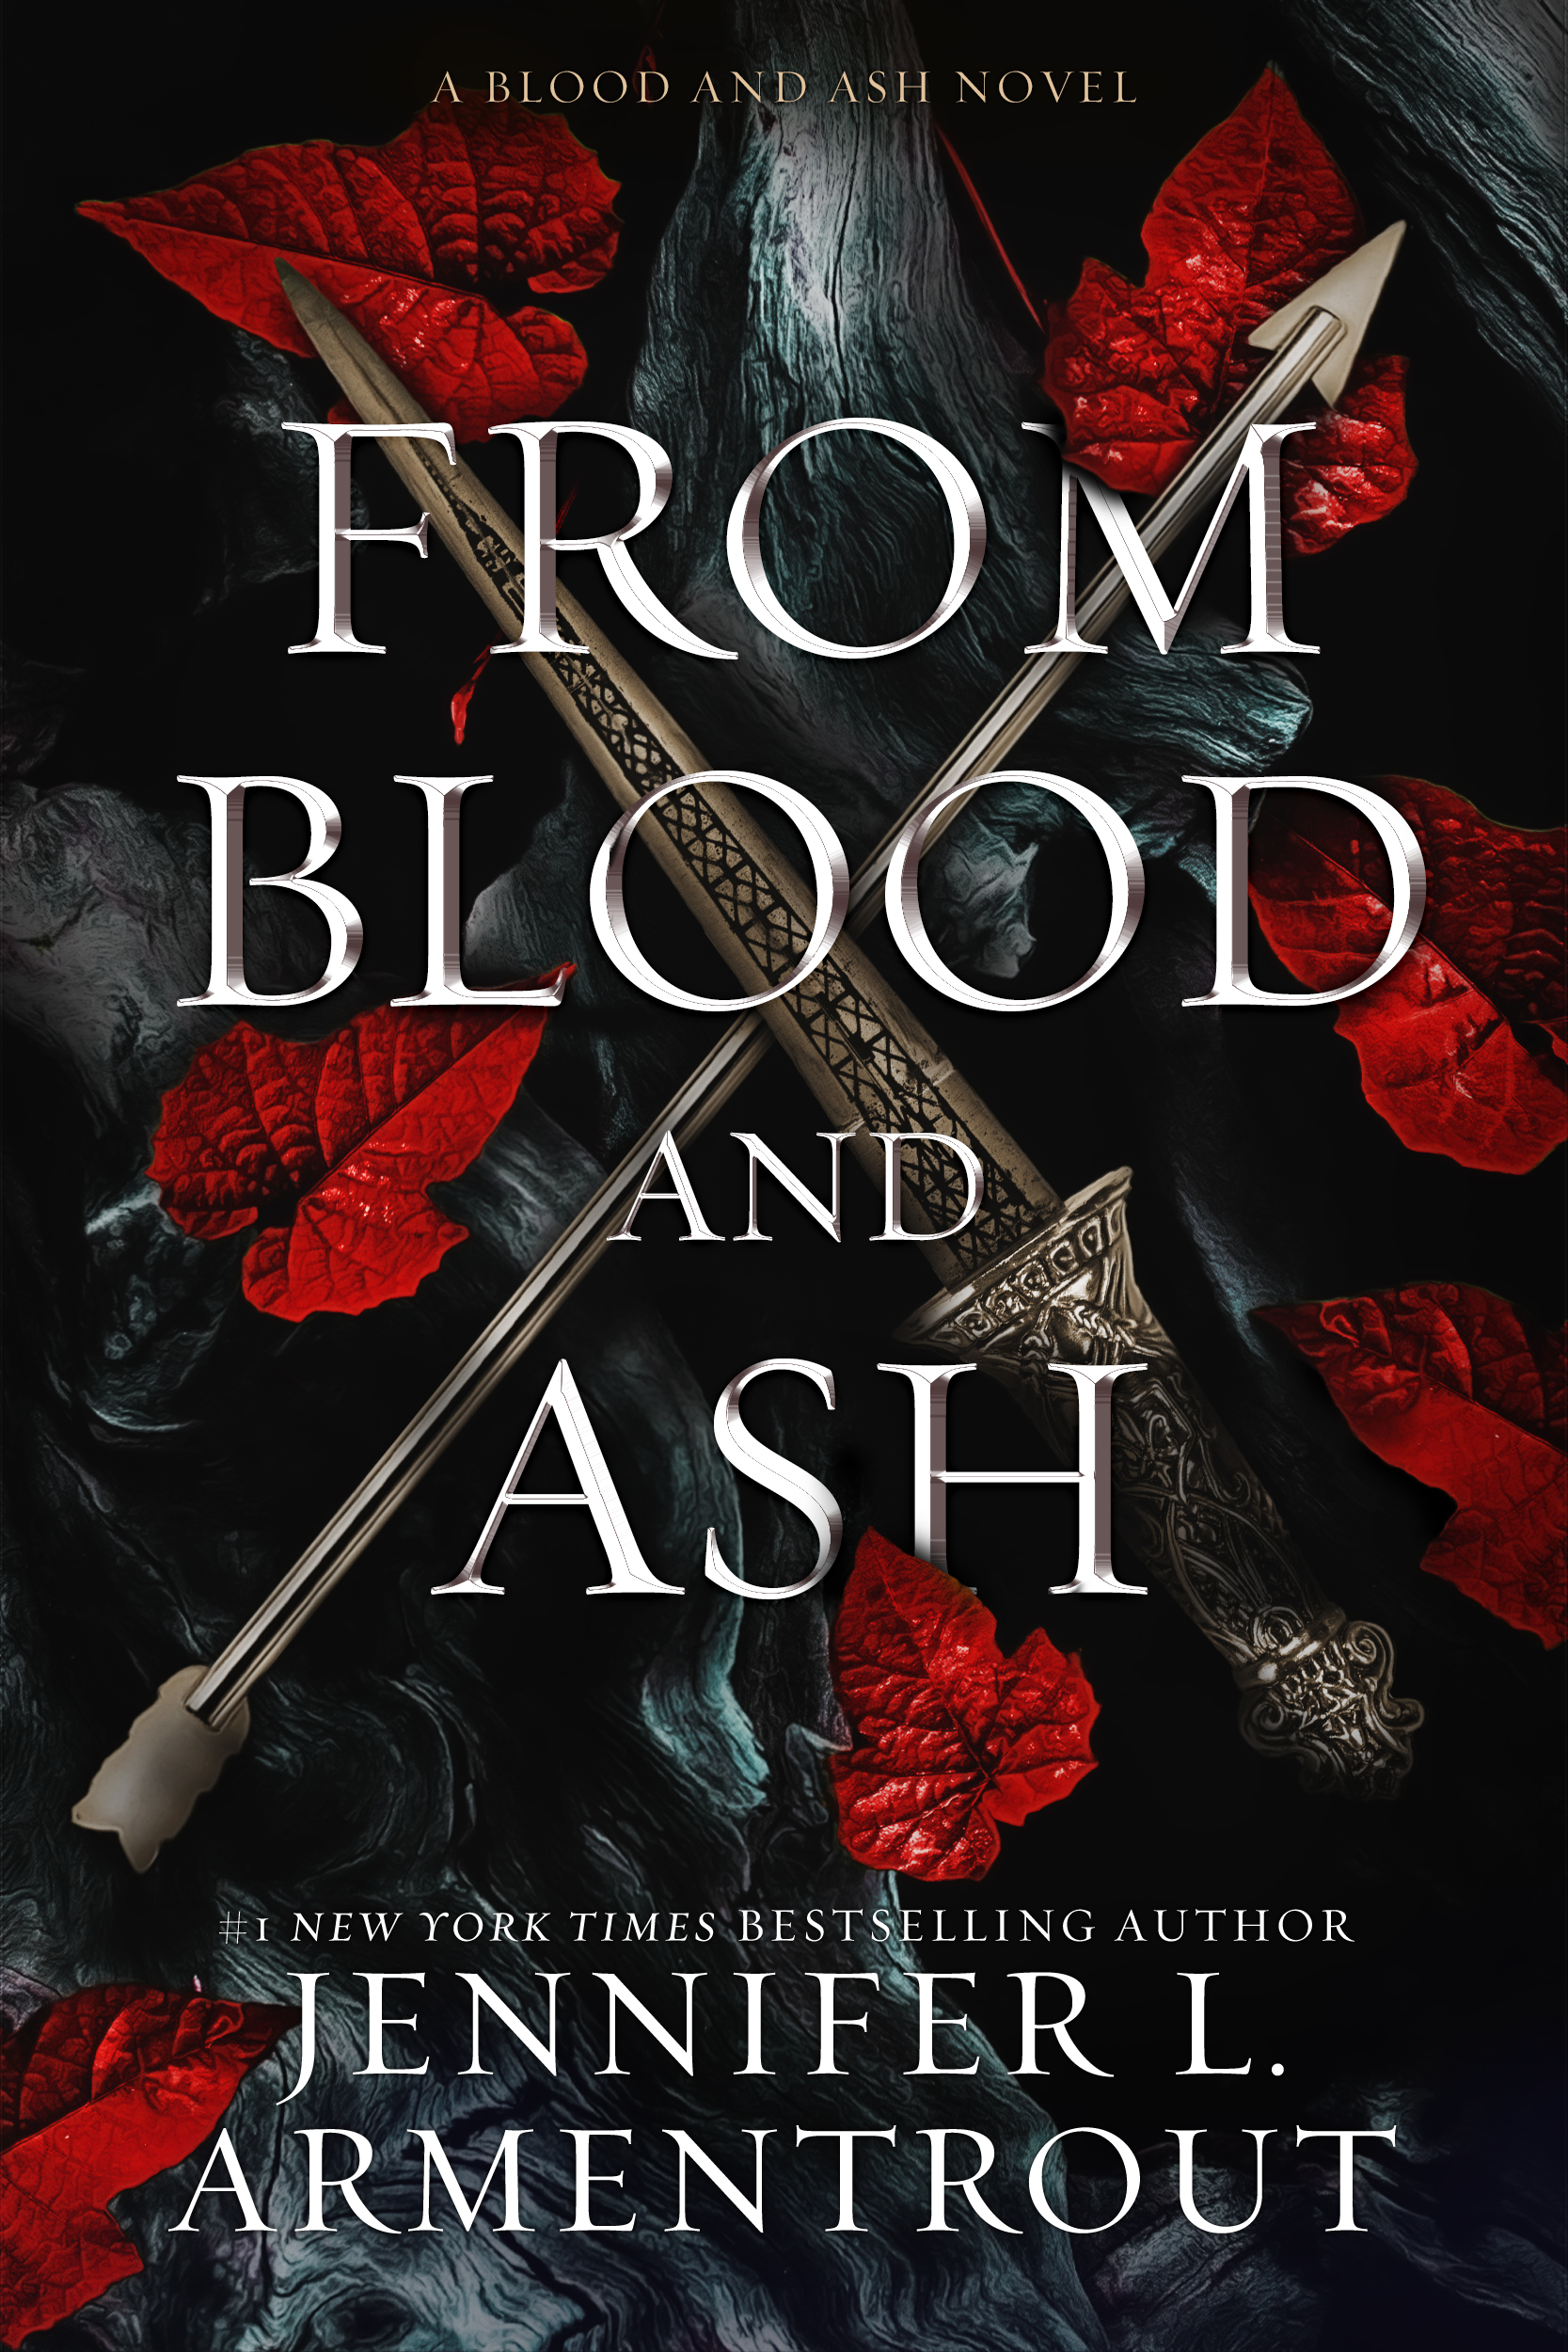 Image de couverture de From Blood and Ash [electronic resource] : A Blood and Ash Novel